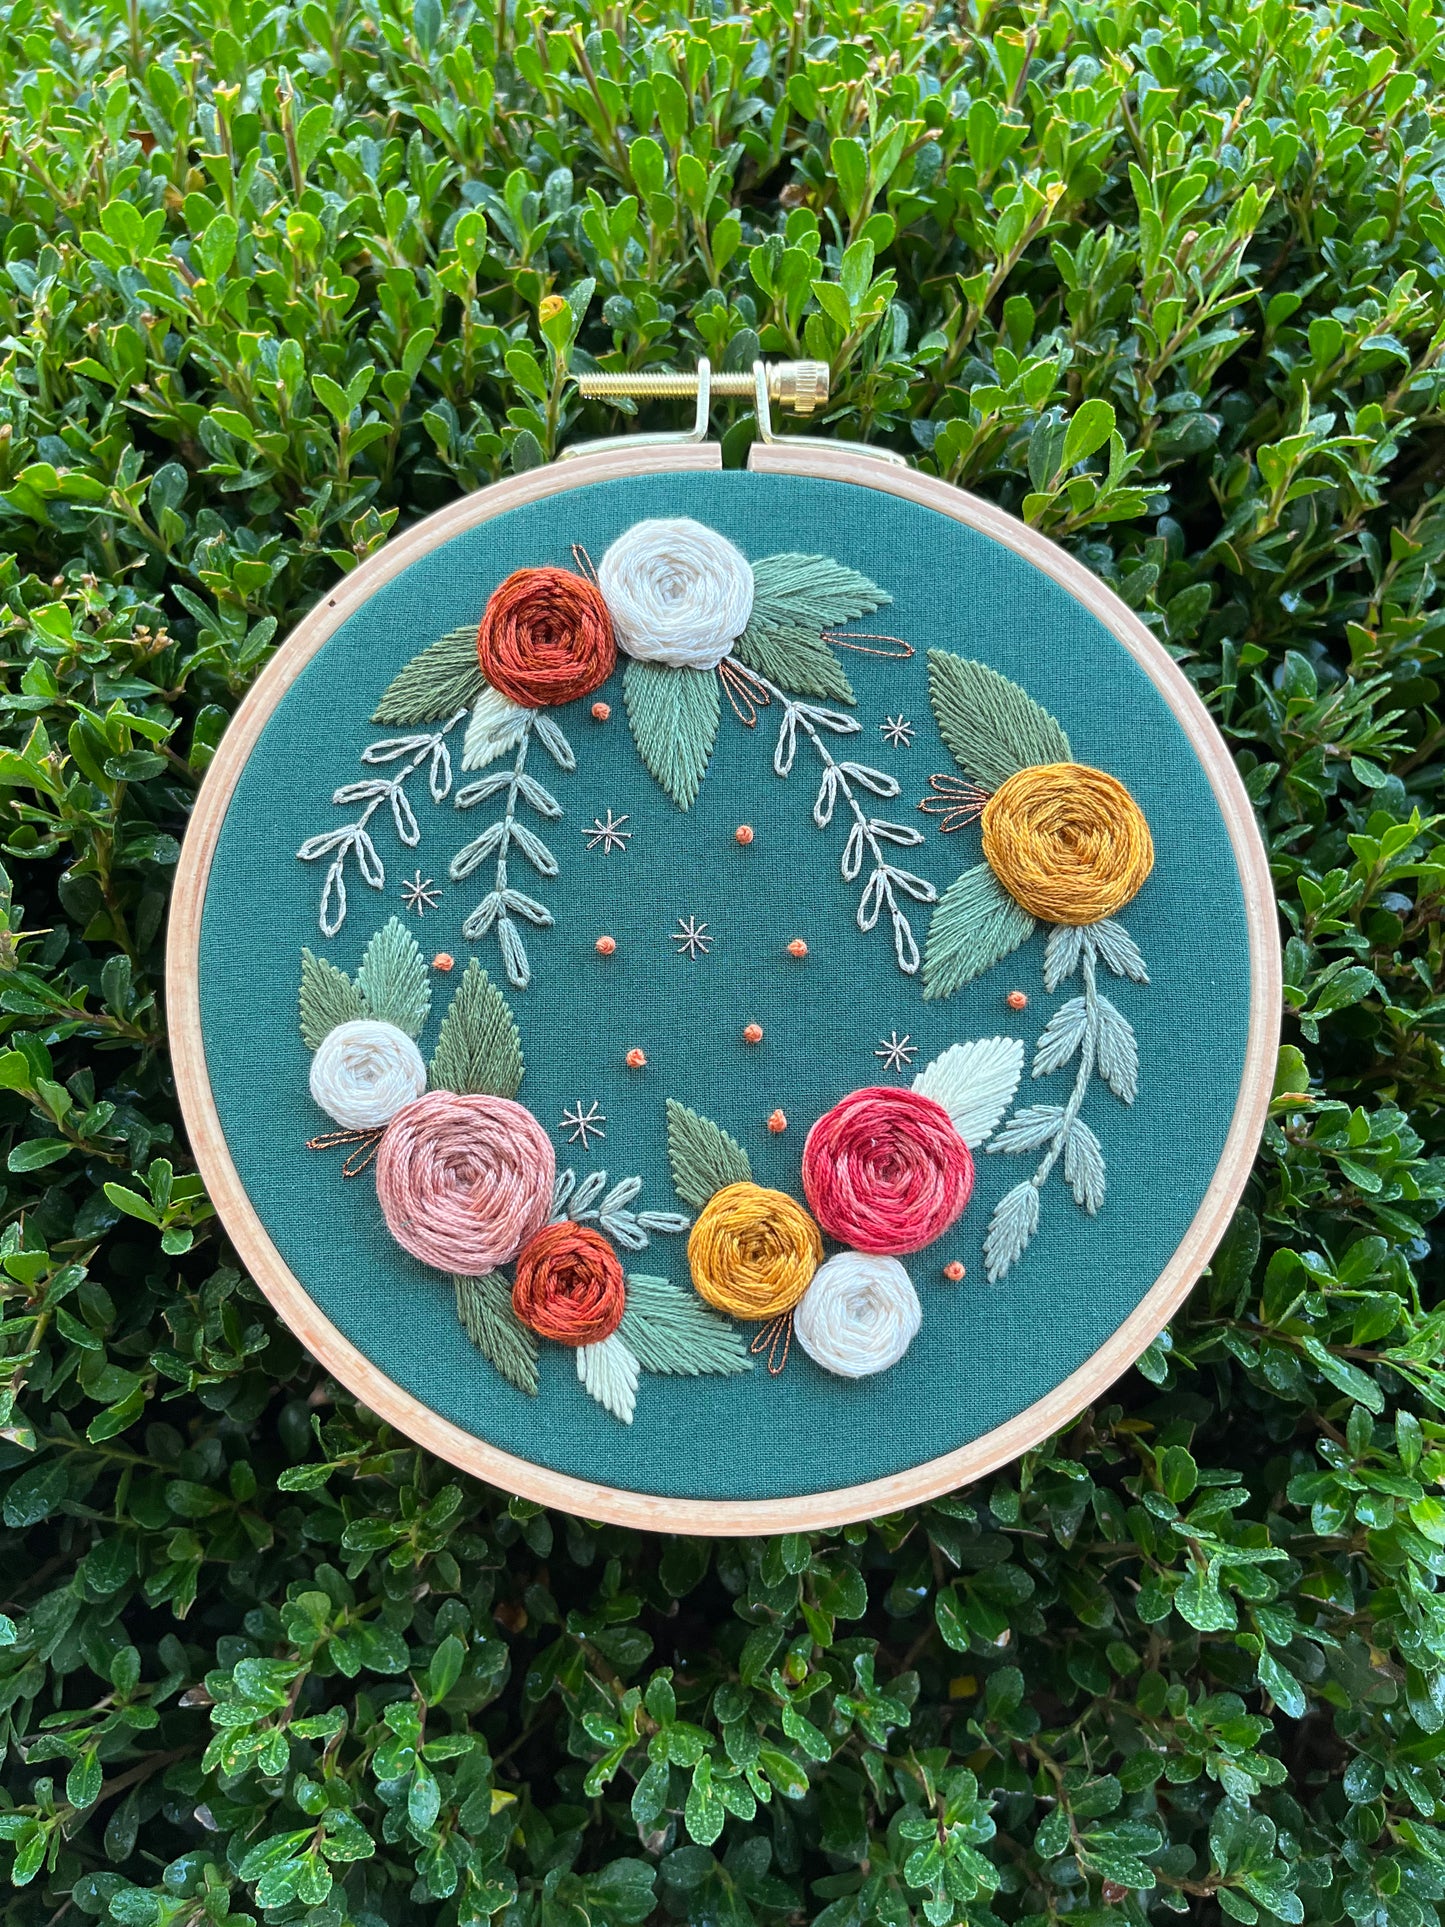 6” Autumn Blossoms - Handmade Embroidery Hoop